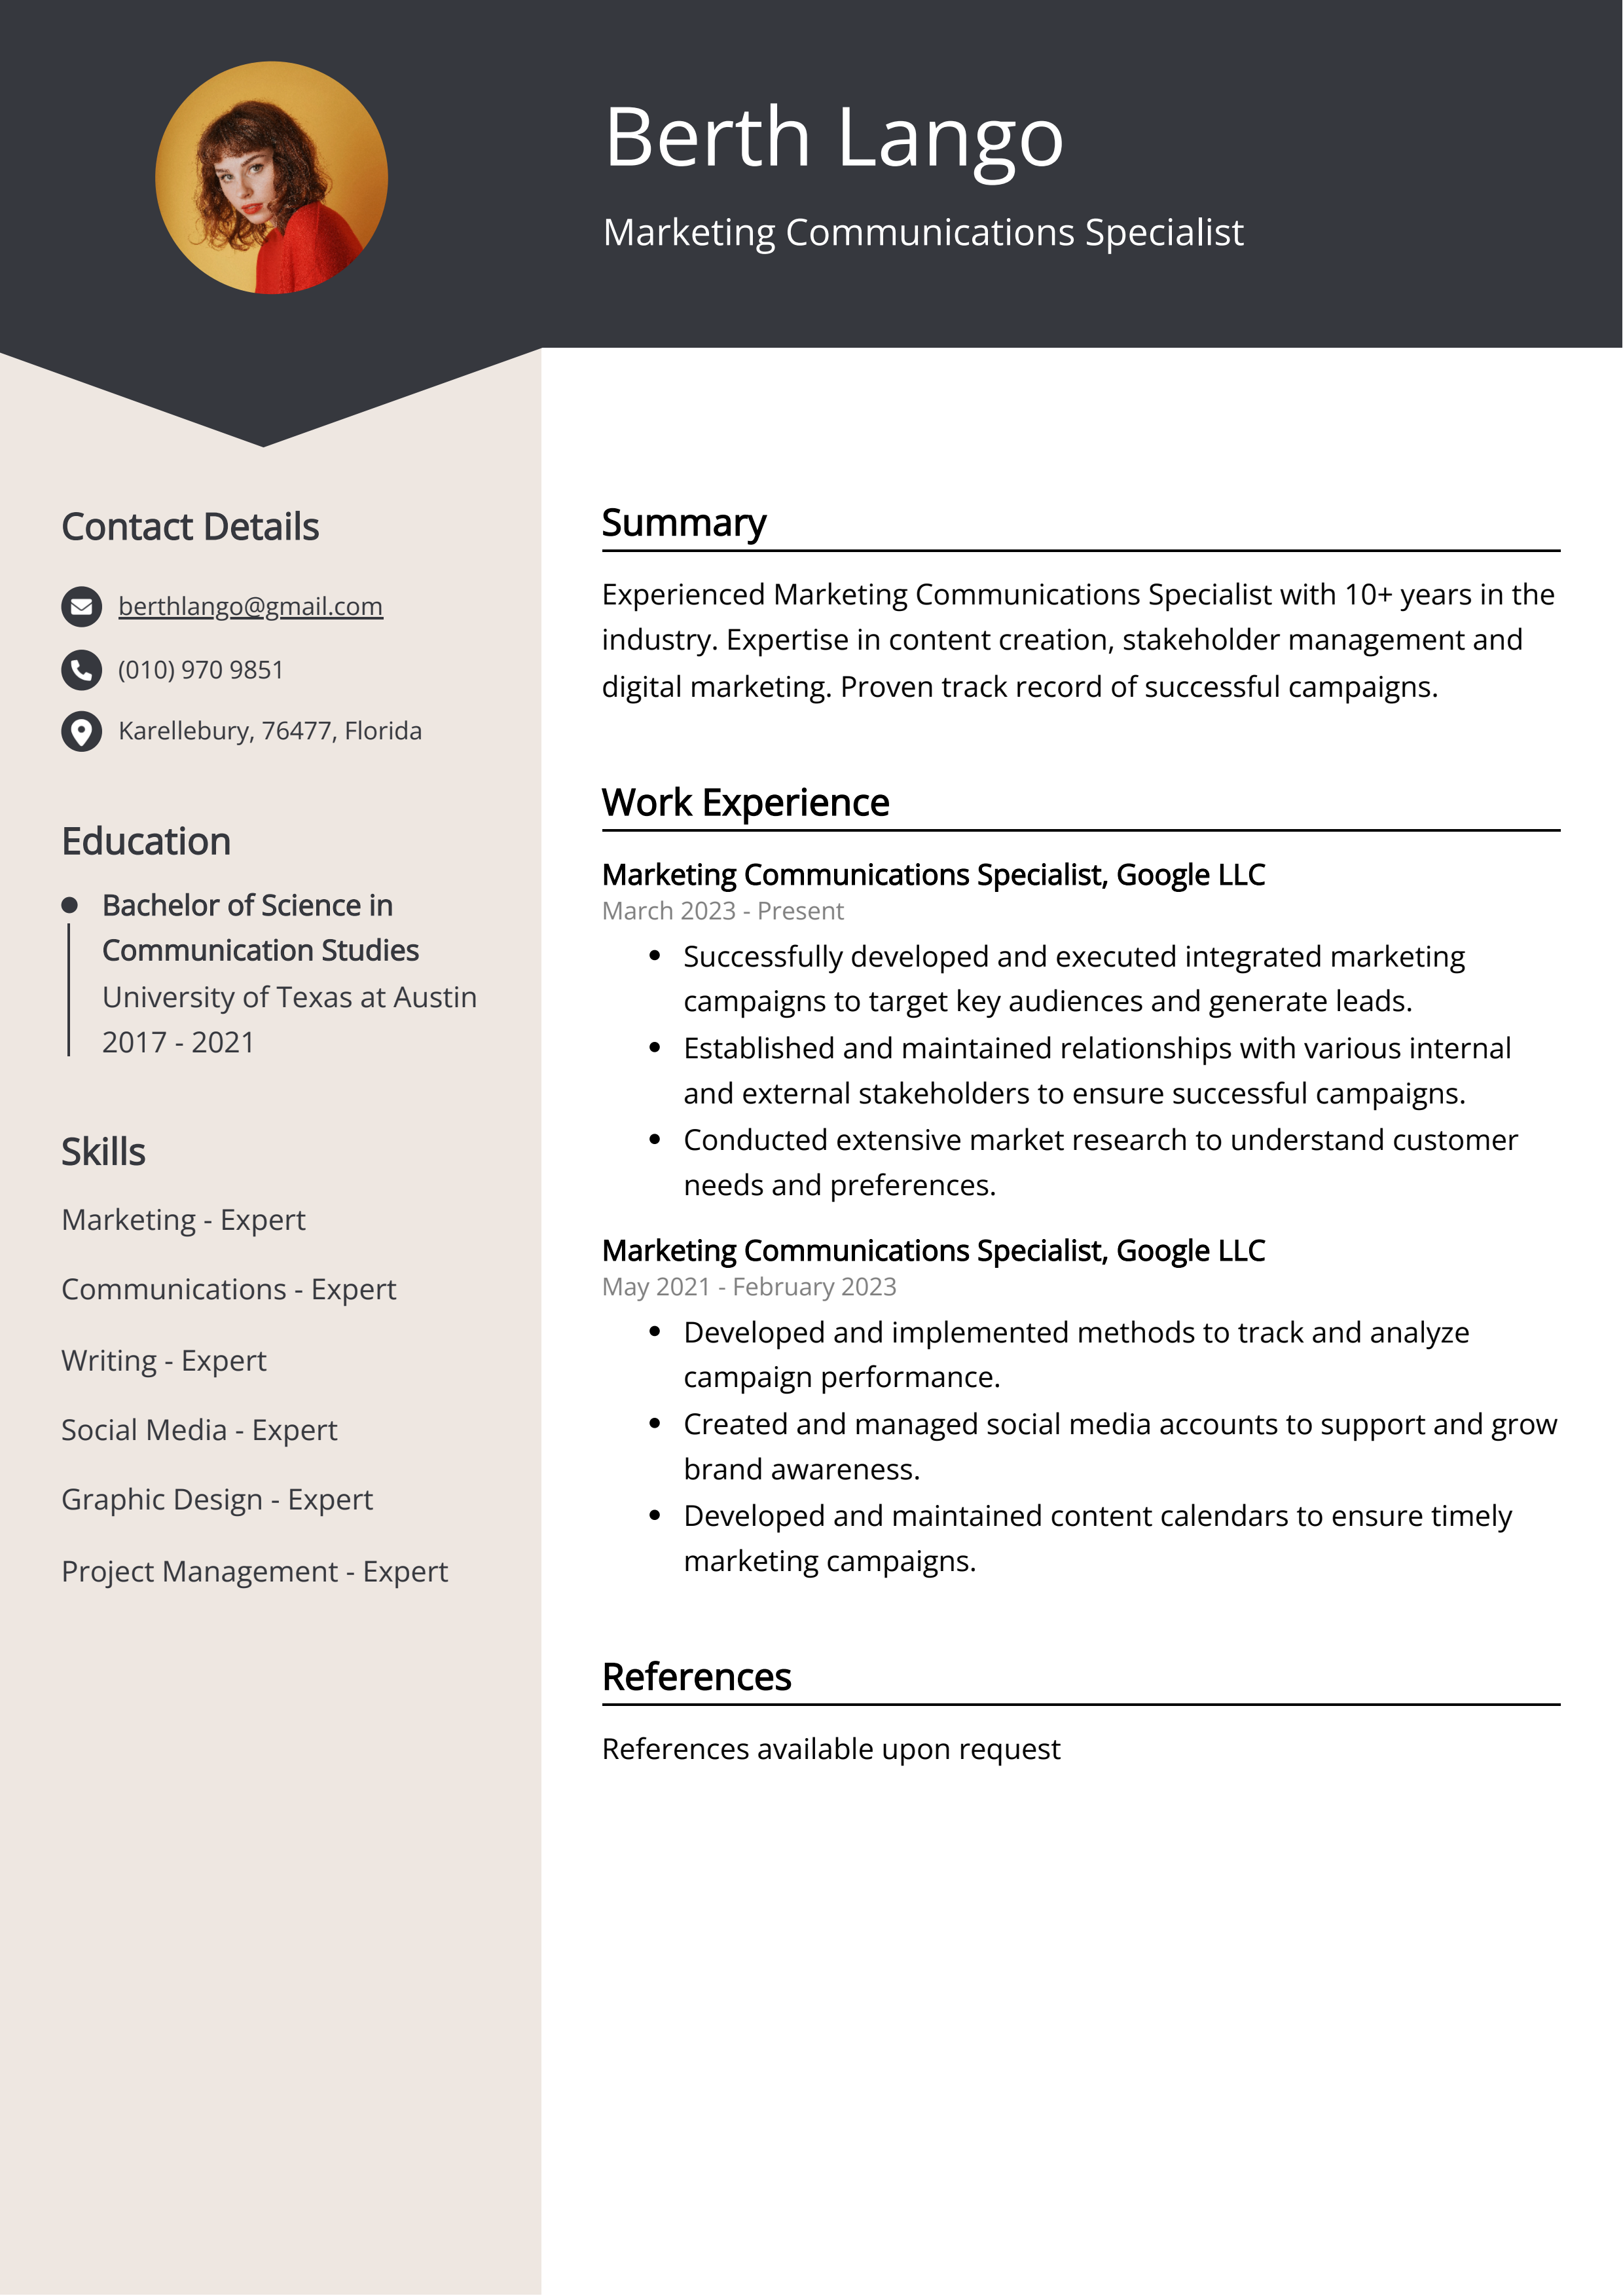 Marketing Communications Specialist Resume Example